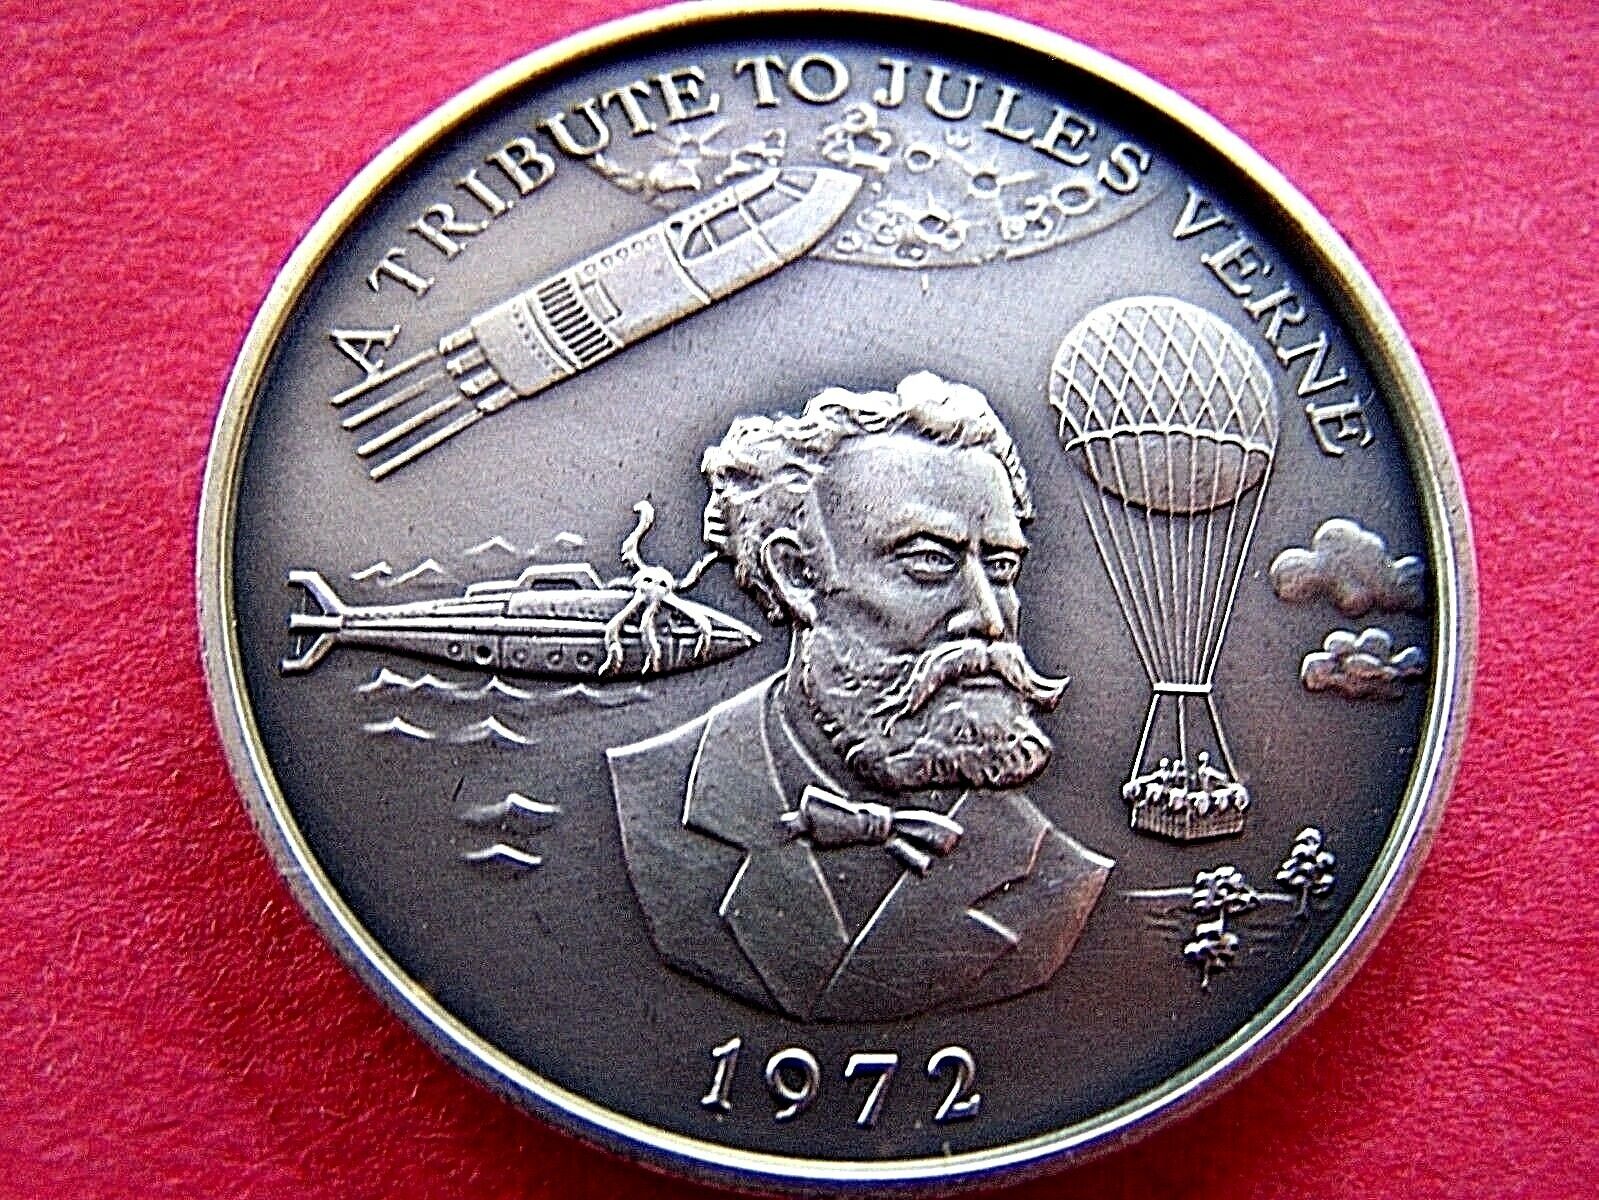 1972 Rex JULES VERNE TRIBUTE Oxidized Silver High Relief Mardi Gras Doubloon